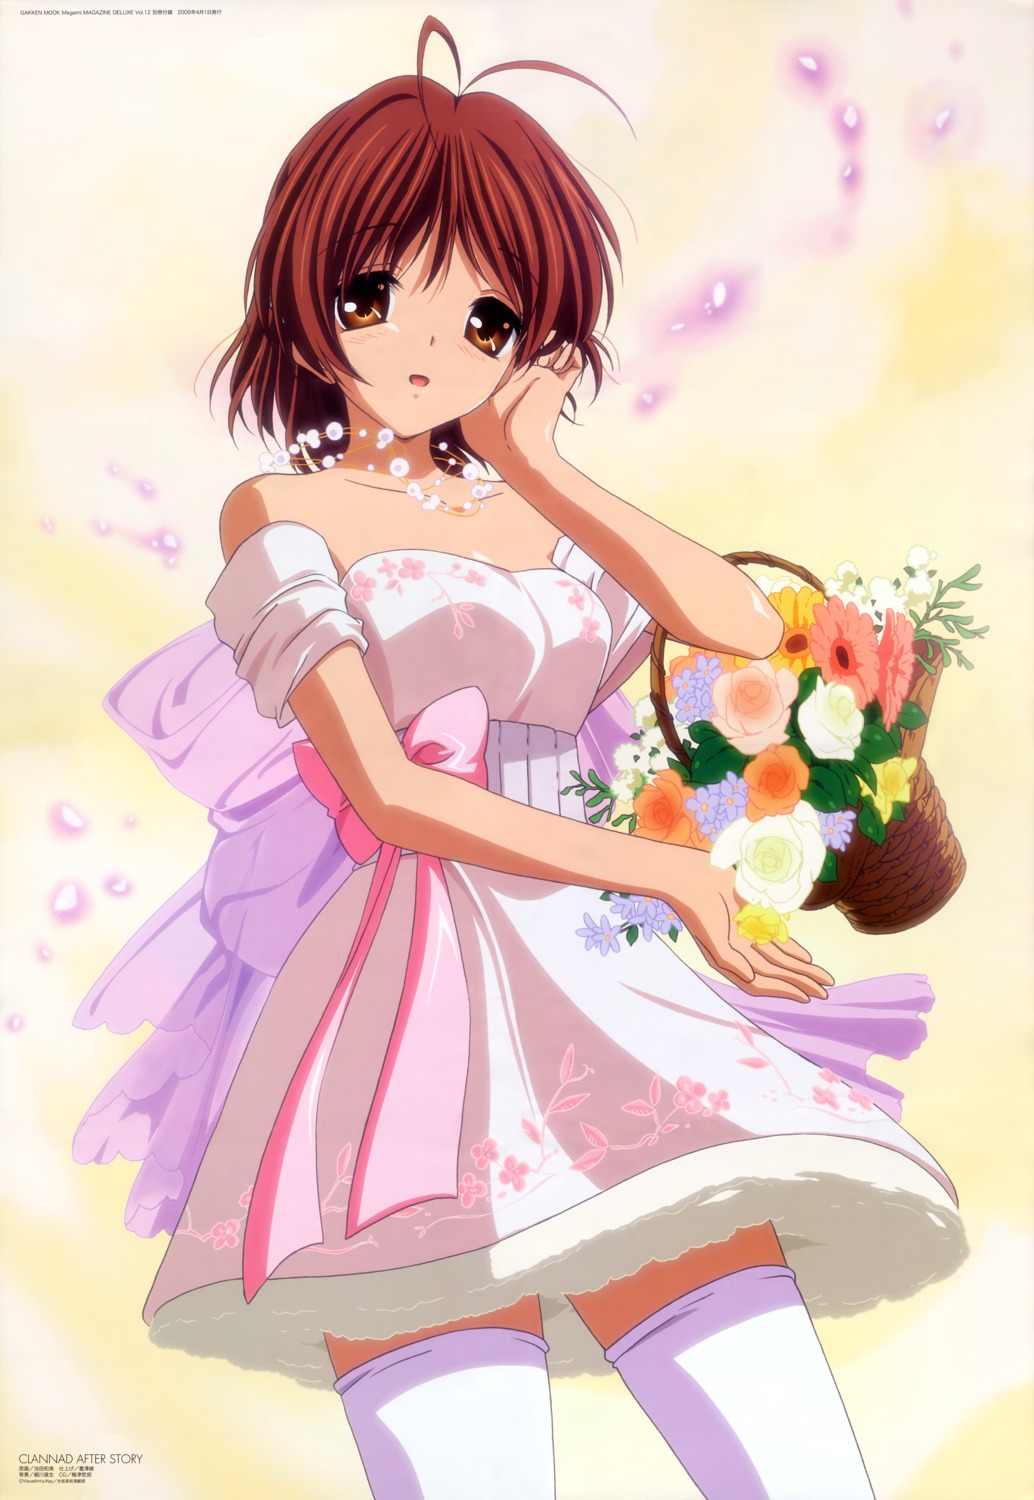 The Girl's Fantasy, Clannad Wiki